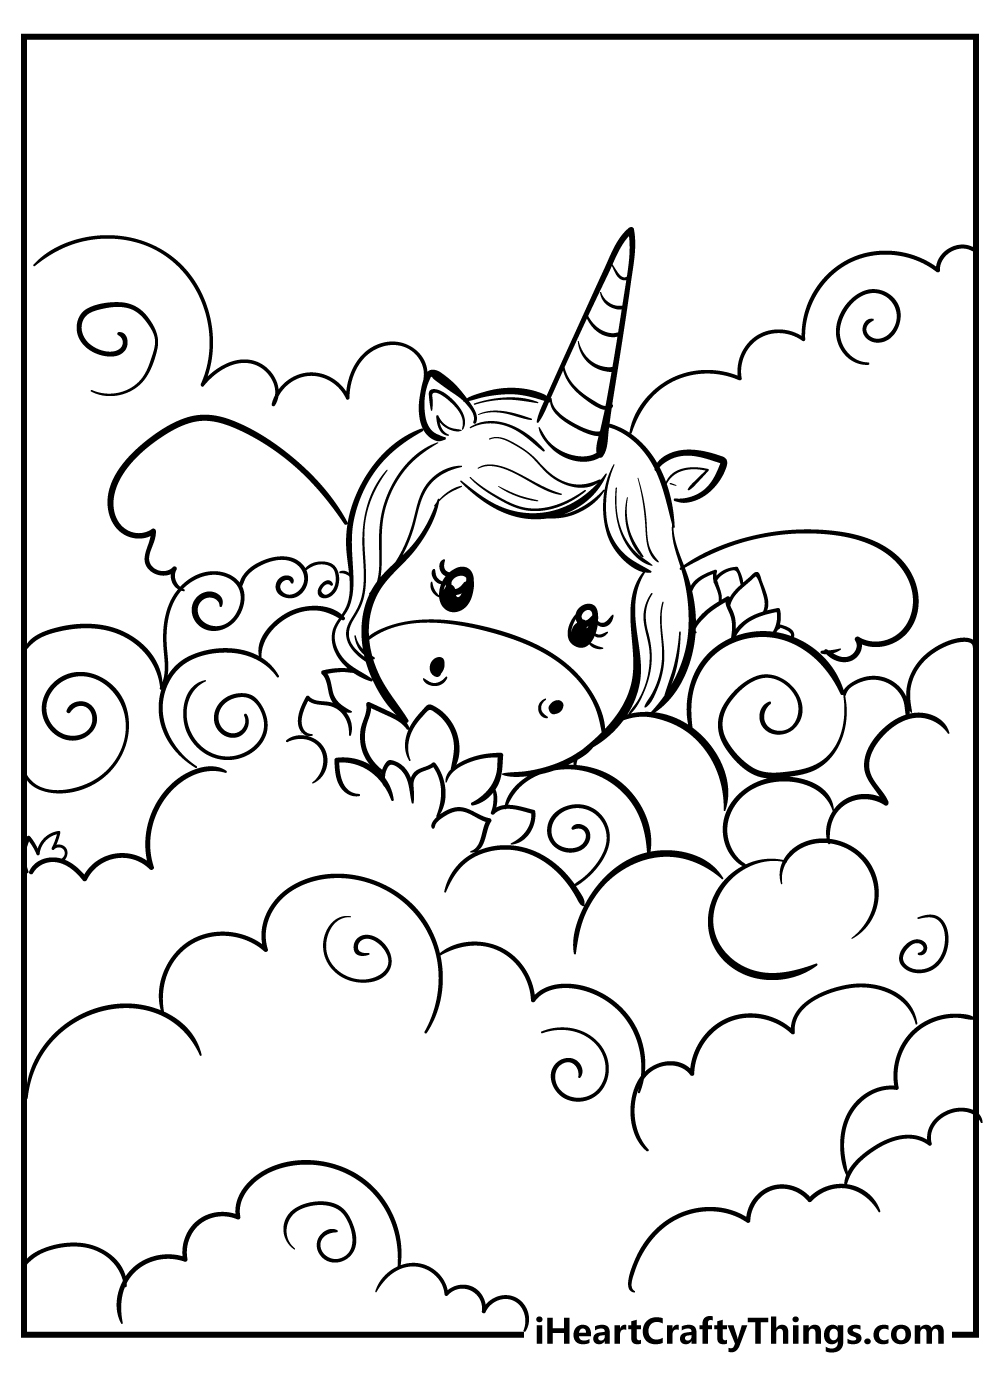 Unicorn Coloring Pages free printable